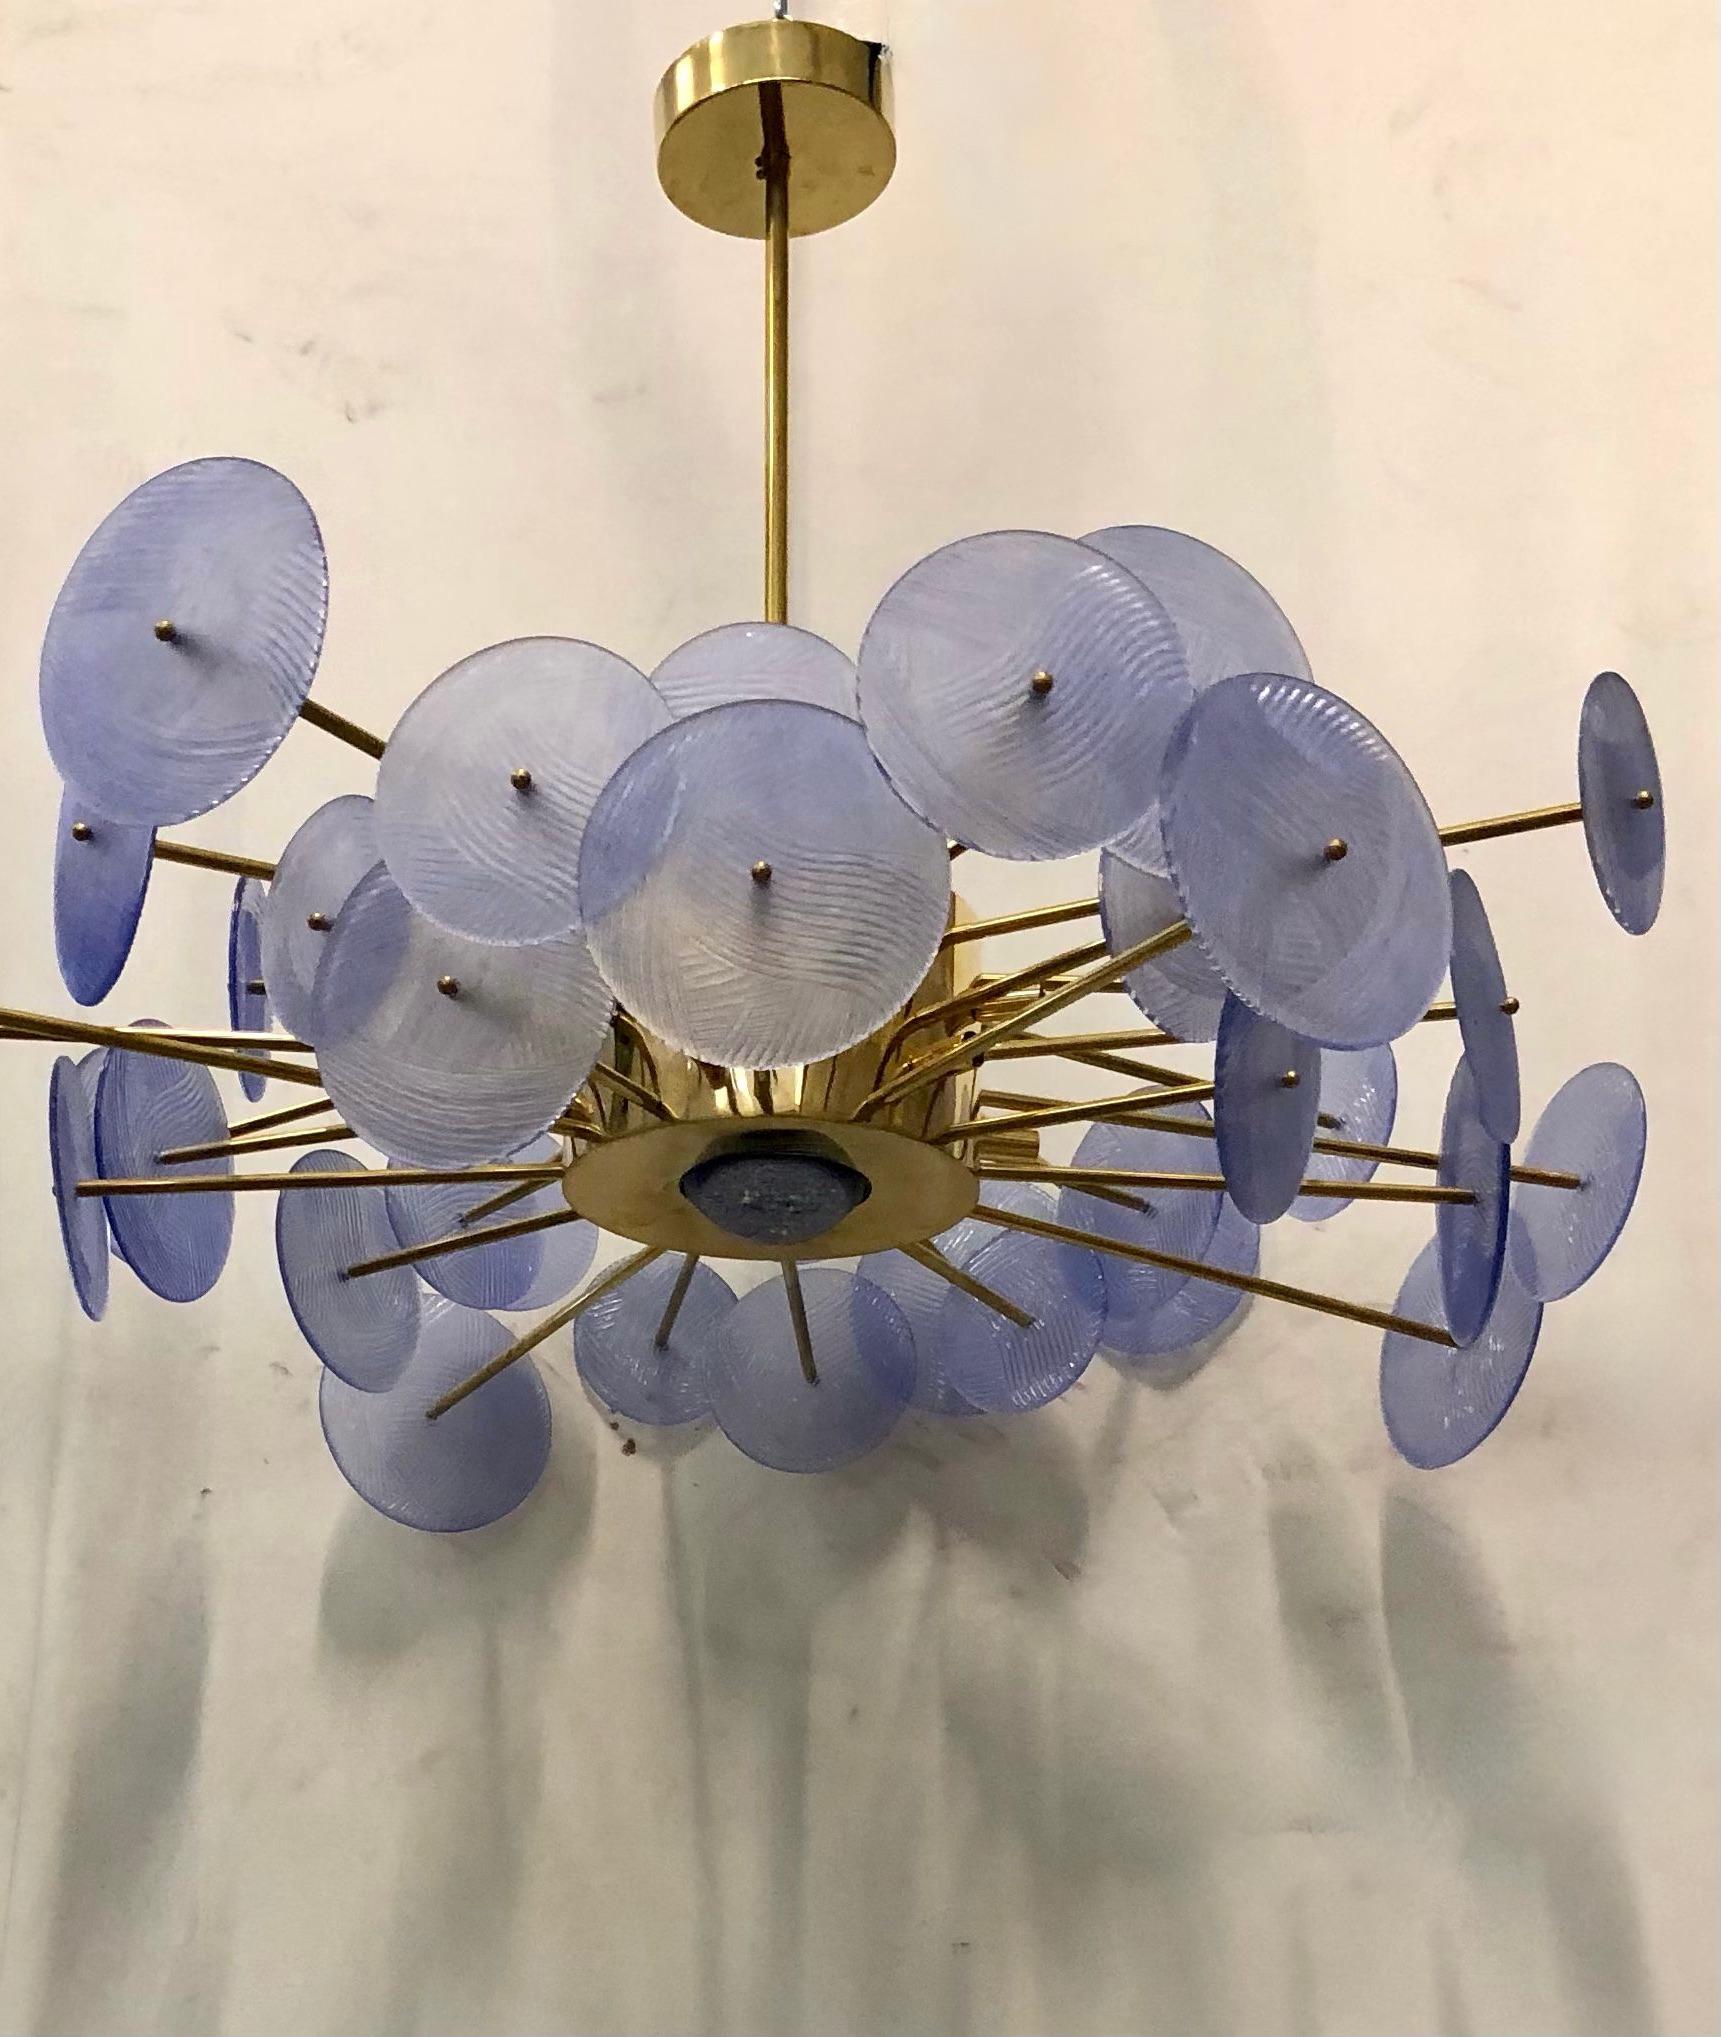 Particular circular sputnik with brass structure and Murano glass discs. It looks like a system of planets that gravitate circularly. The design with this large brass central body is very nice.

Chandelier with all brass structure, and Periwinkle